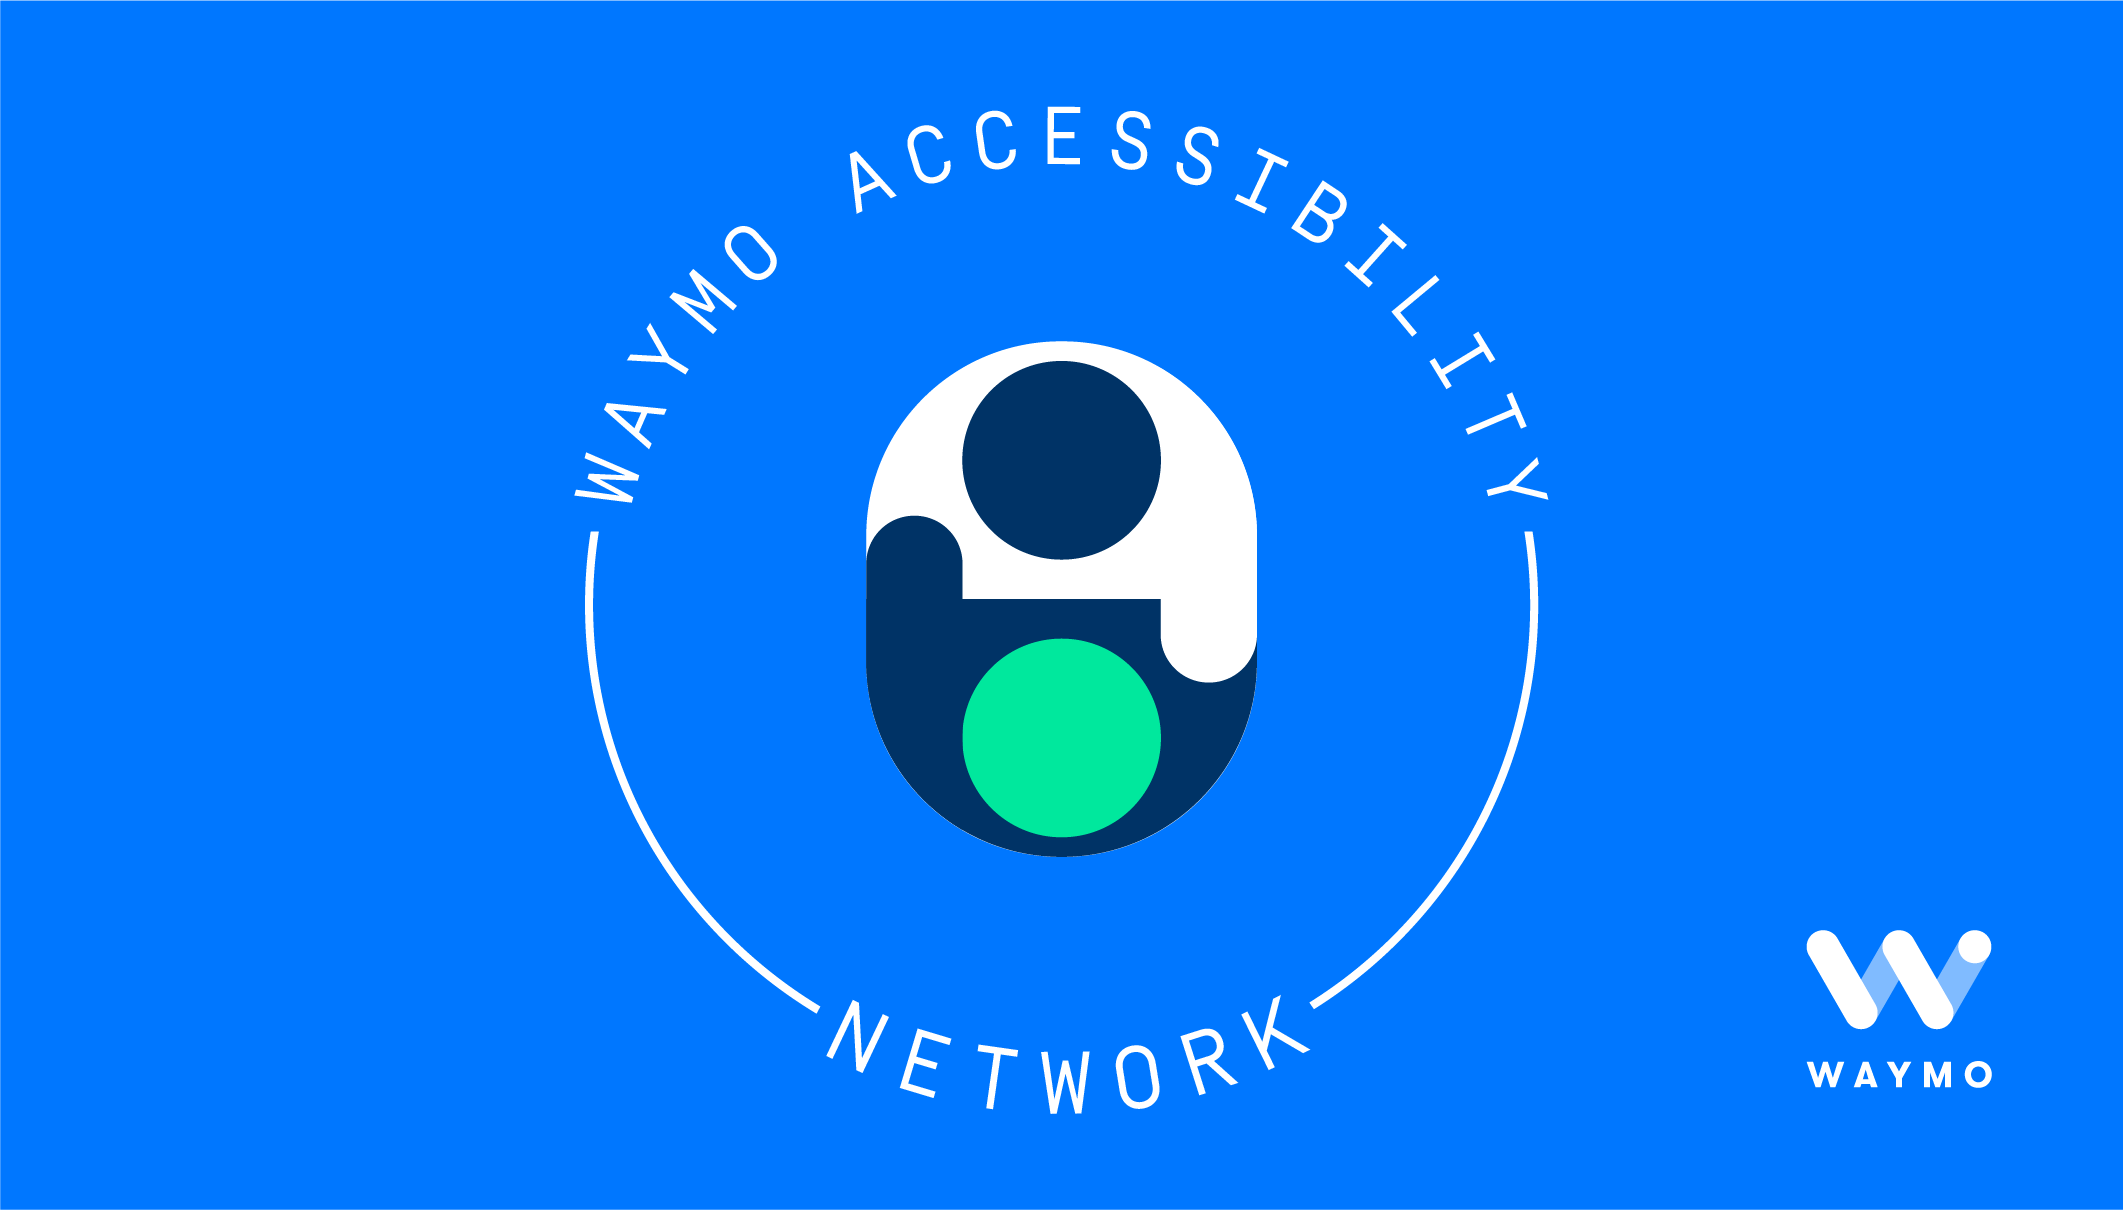 Launching the Waymo Accessibility Network